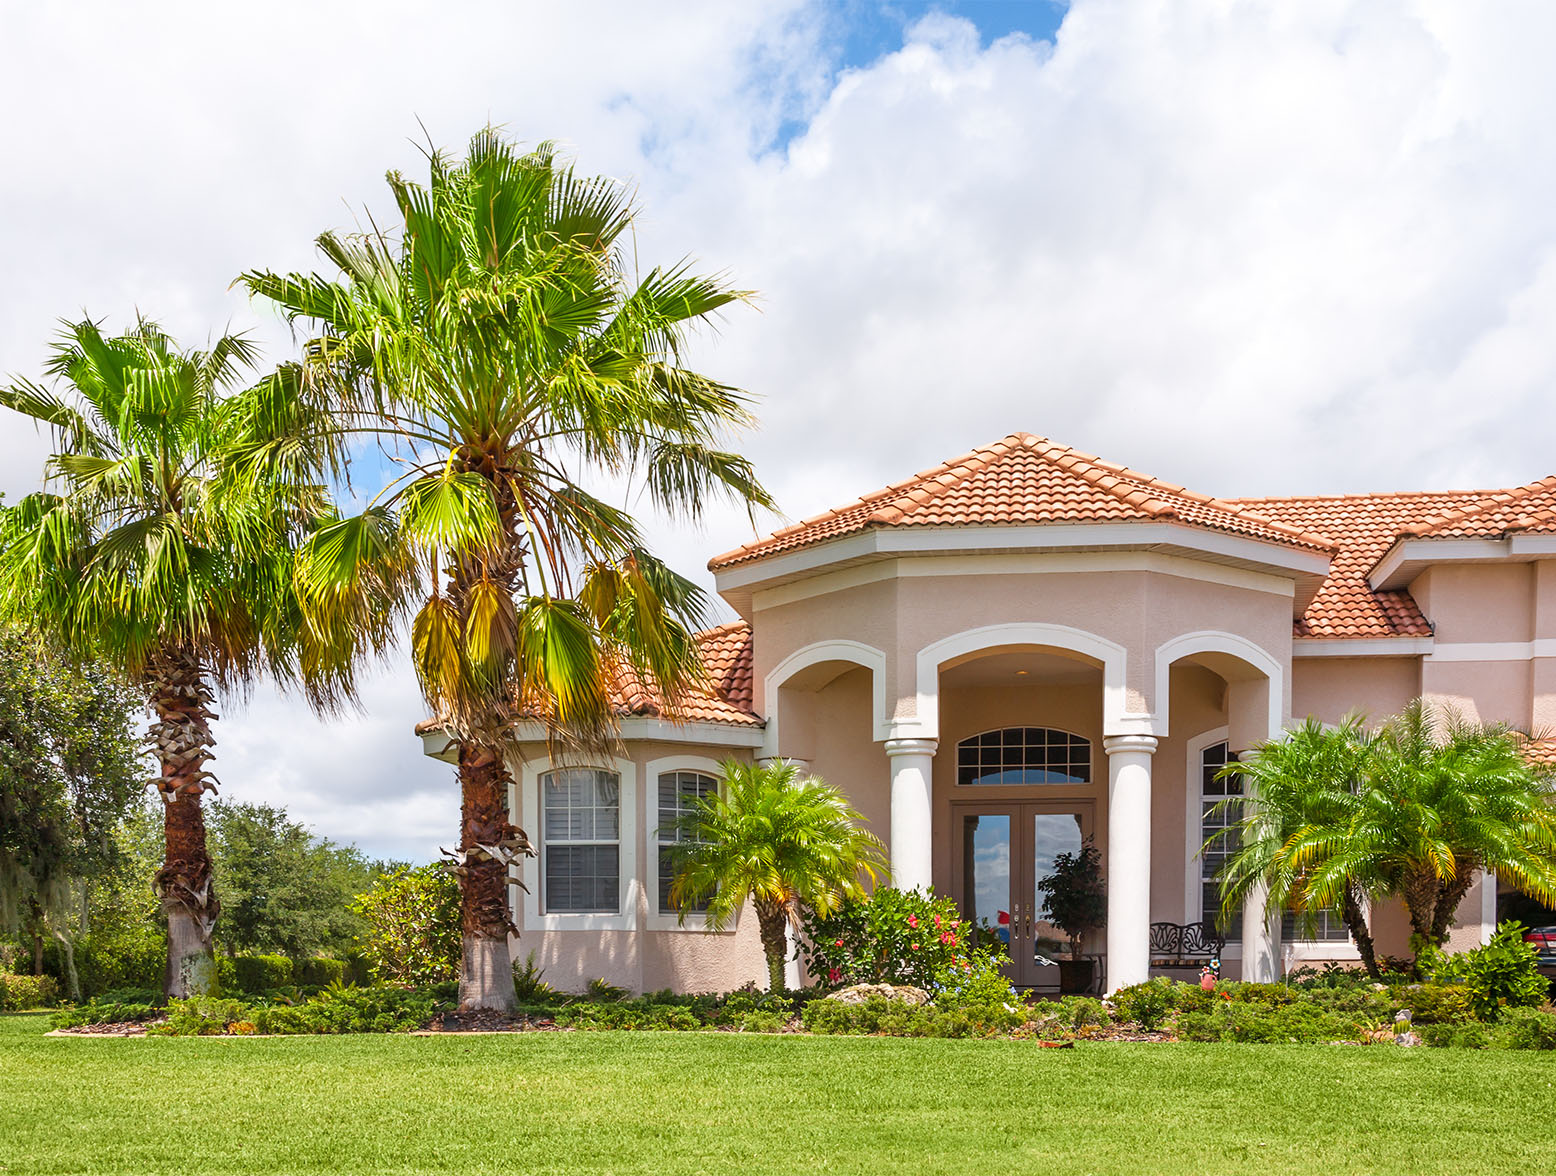 Florida home with palm trees. Ownership becomes difficult with escalating homeowners insurance